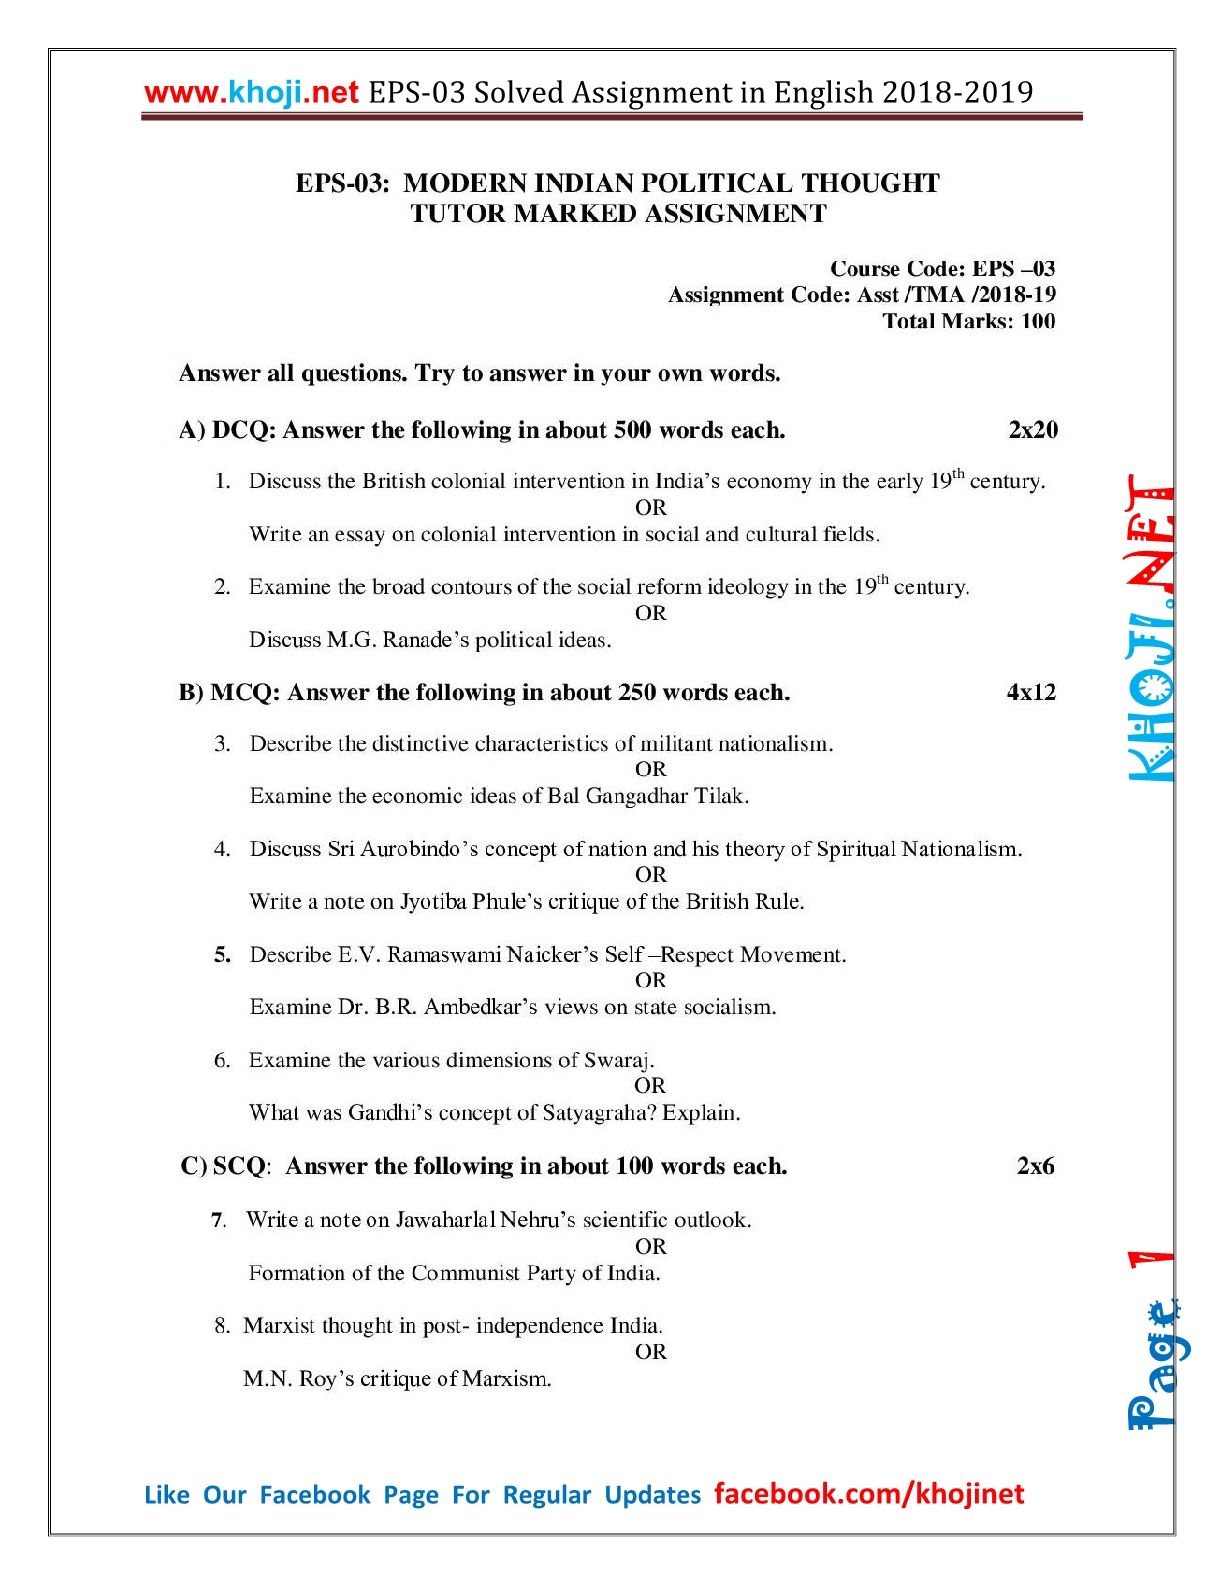 EPS-03 Solved Assignment 2018-19 For IGNOU BA/BDP